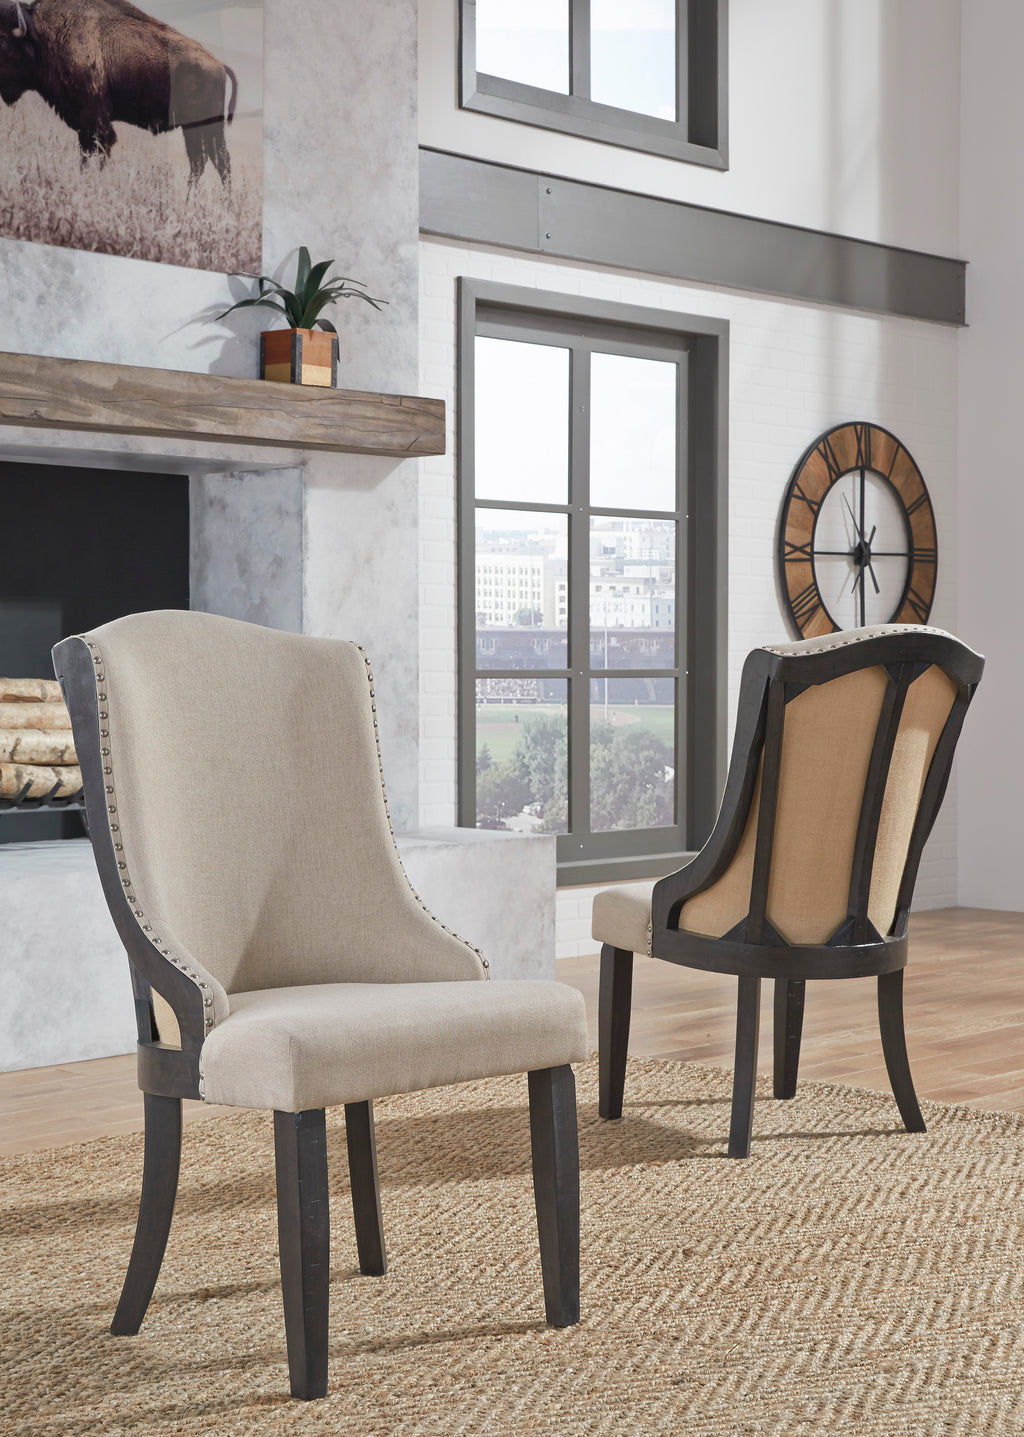 Baylow Dining Chair